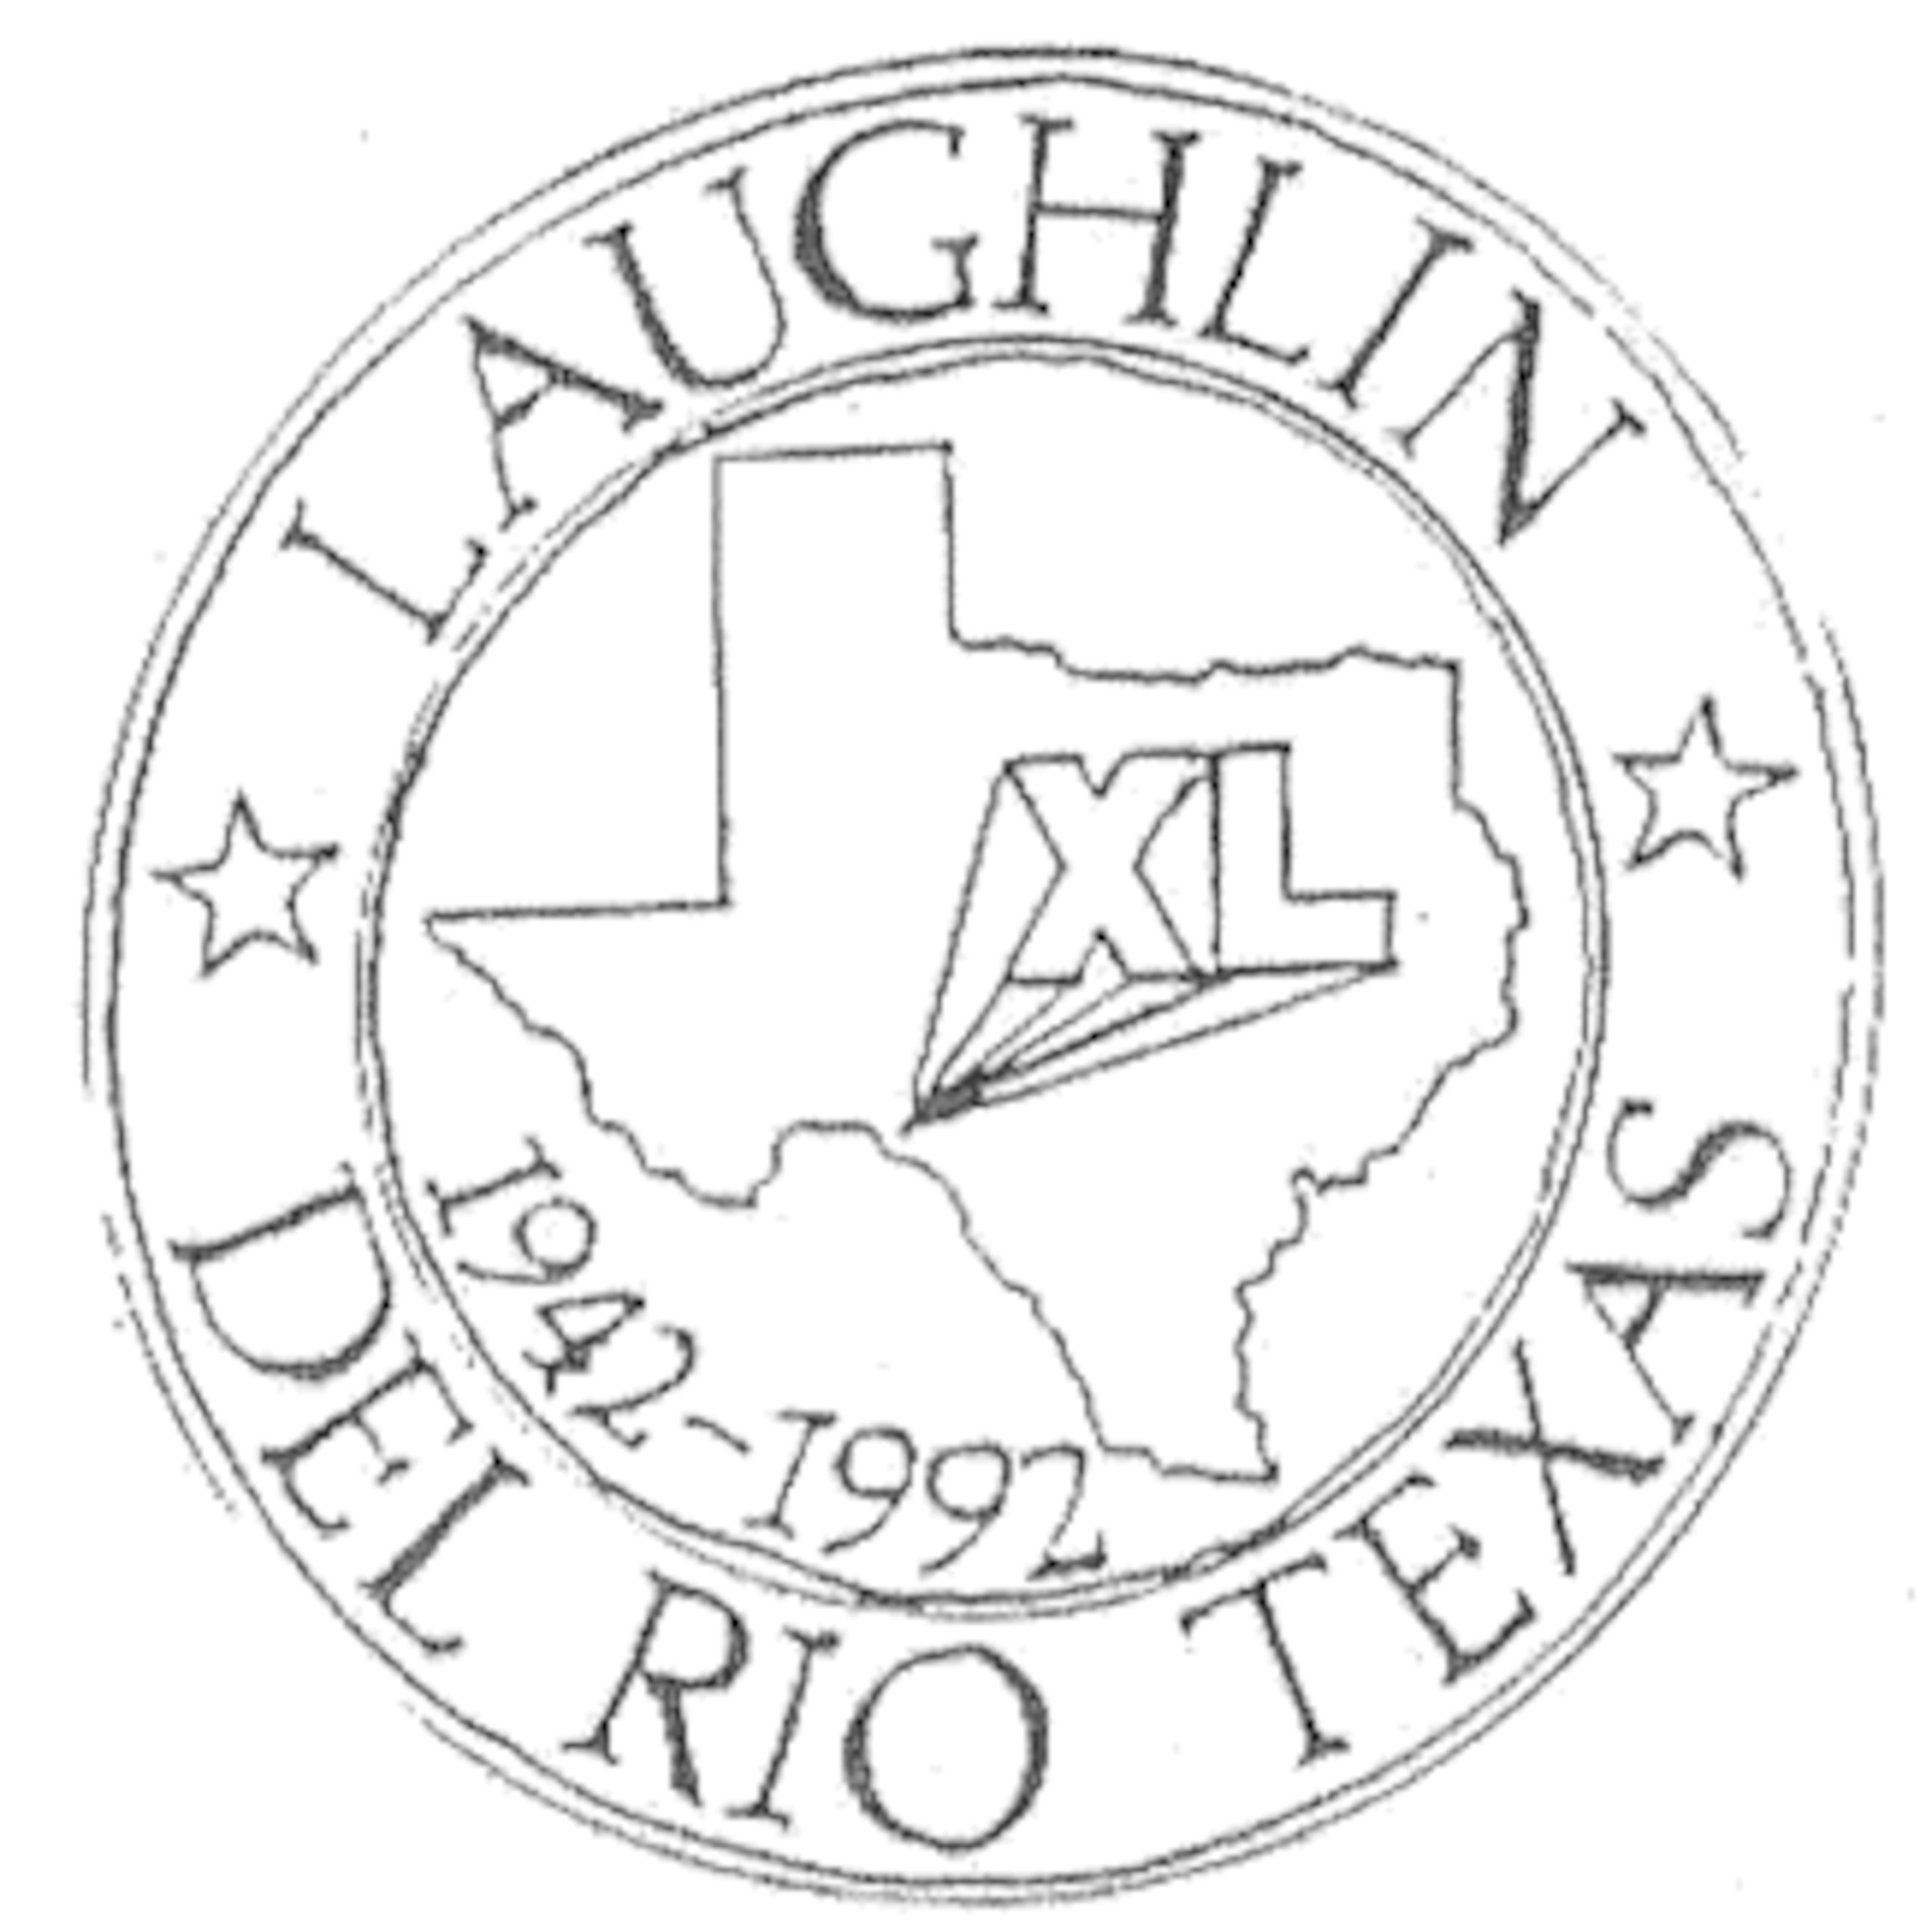 "XL" Logo for Laughlin Air Force Base in 1992. (Courtesy Graphic)